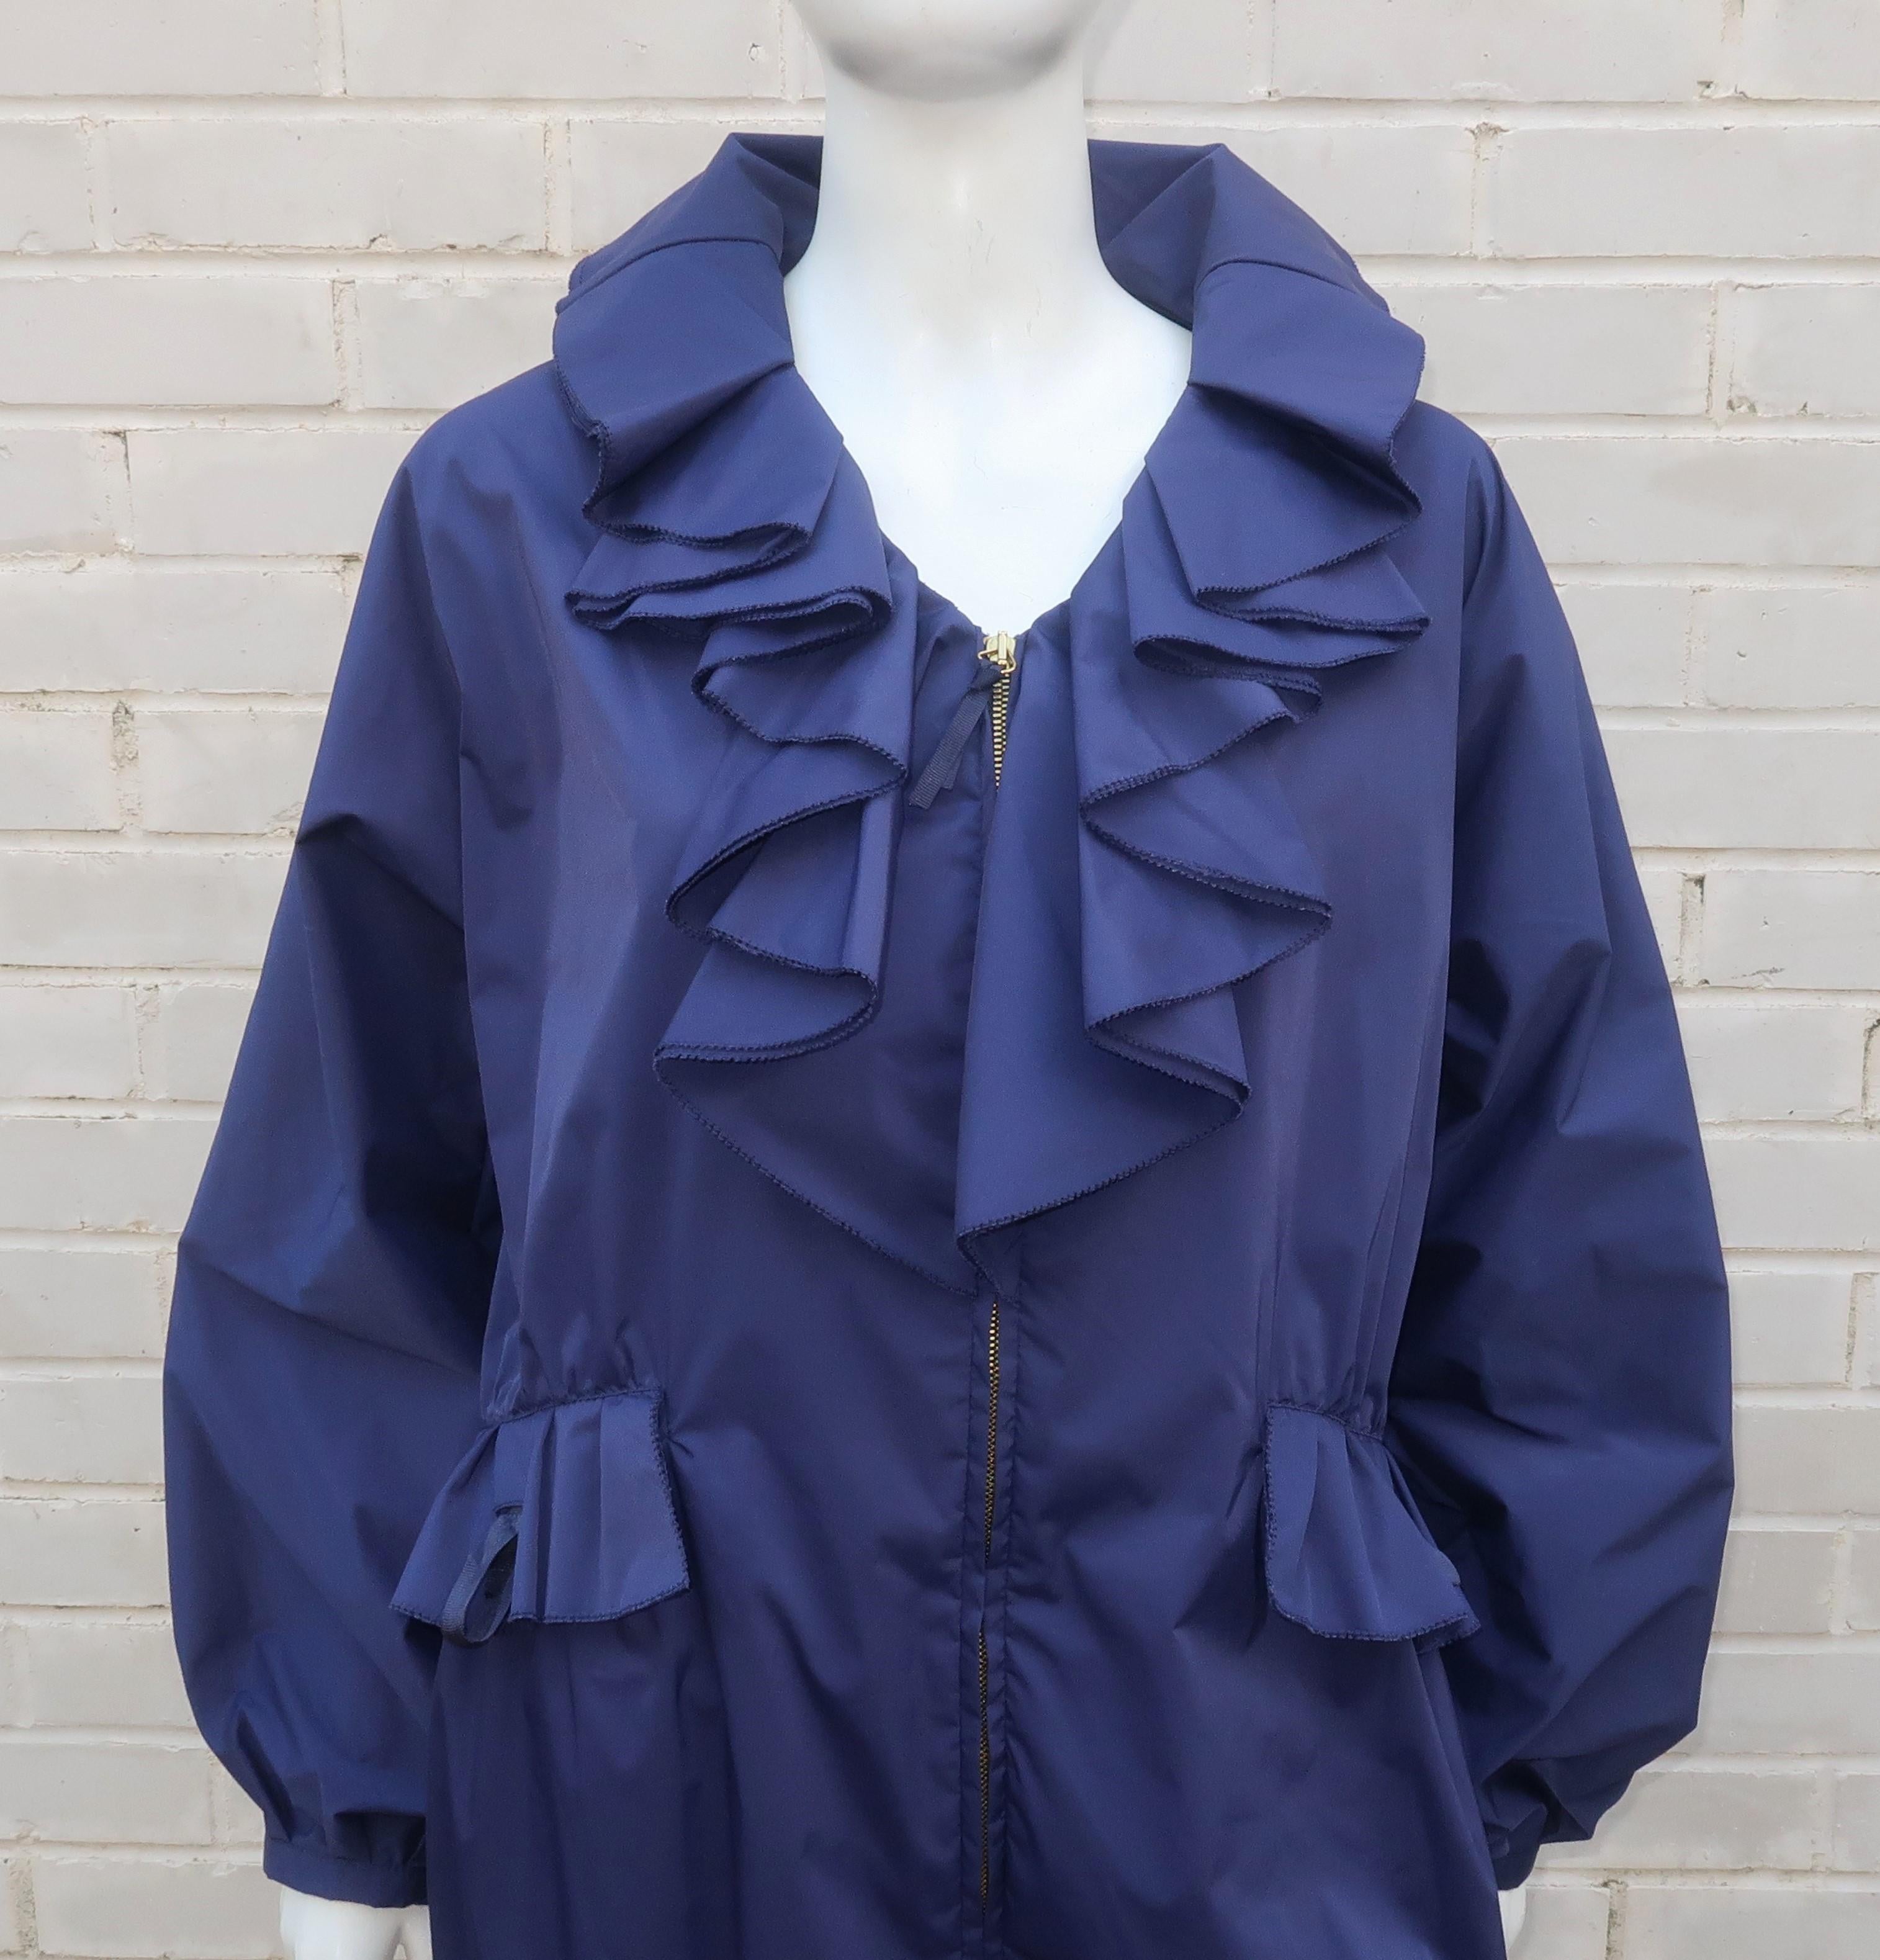 Valentino Roma navy blue windbreaker style jacket with ultra feminine details including a ruffled collar and bubble silhouette.  The jacket has a double zipper at the front, snaps at the hemline, modified balloon sleeves and unique pockets with